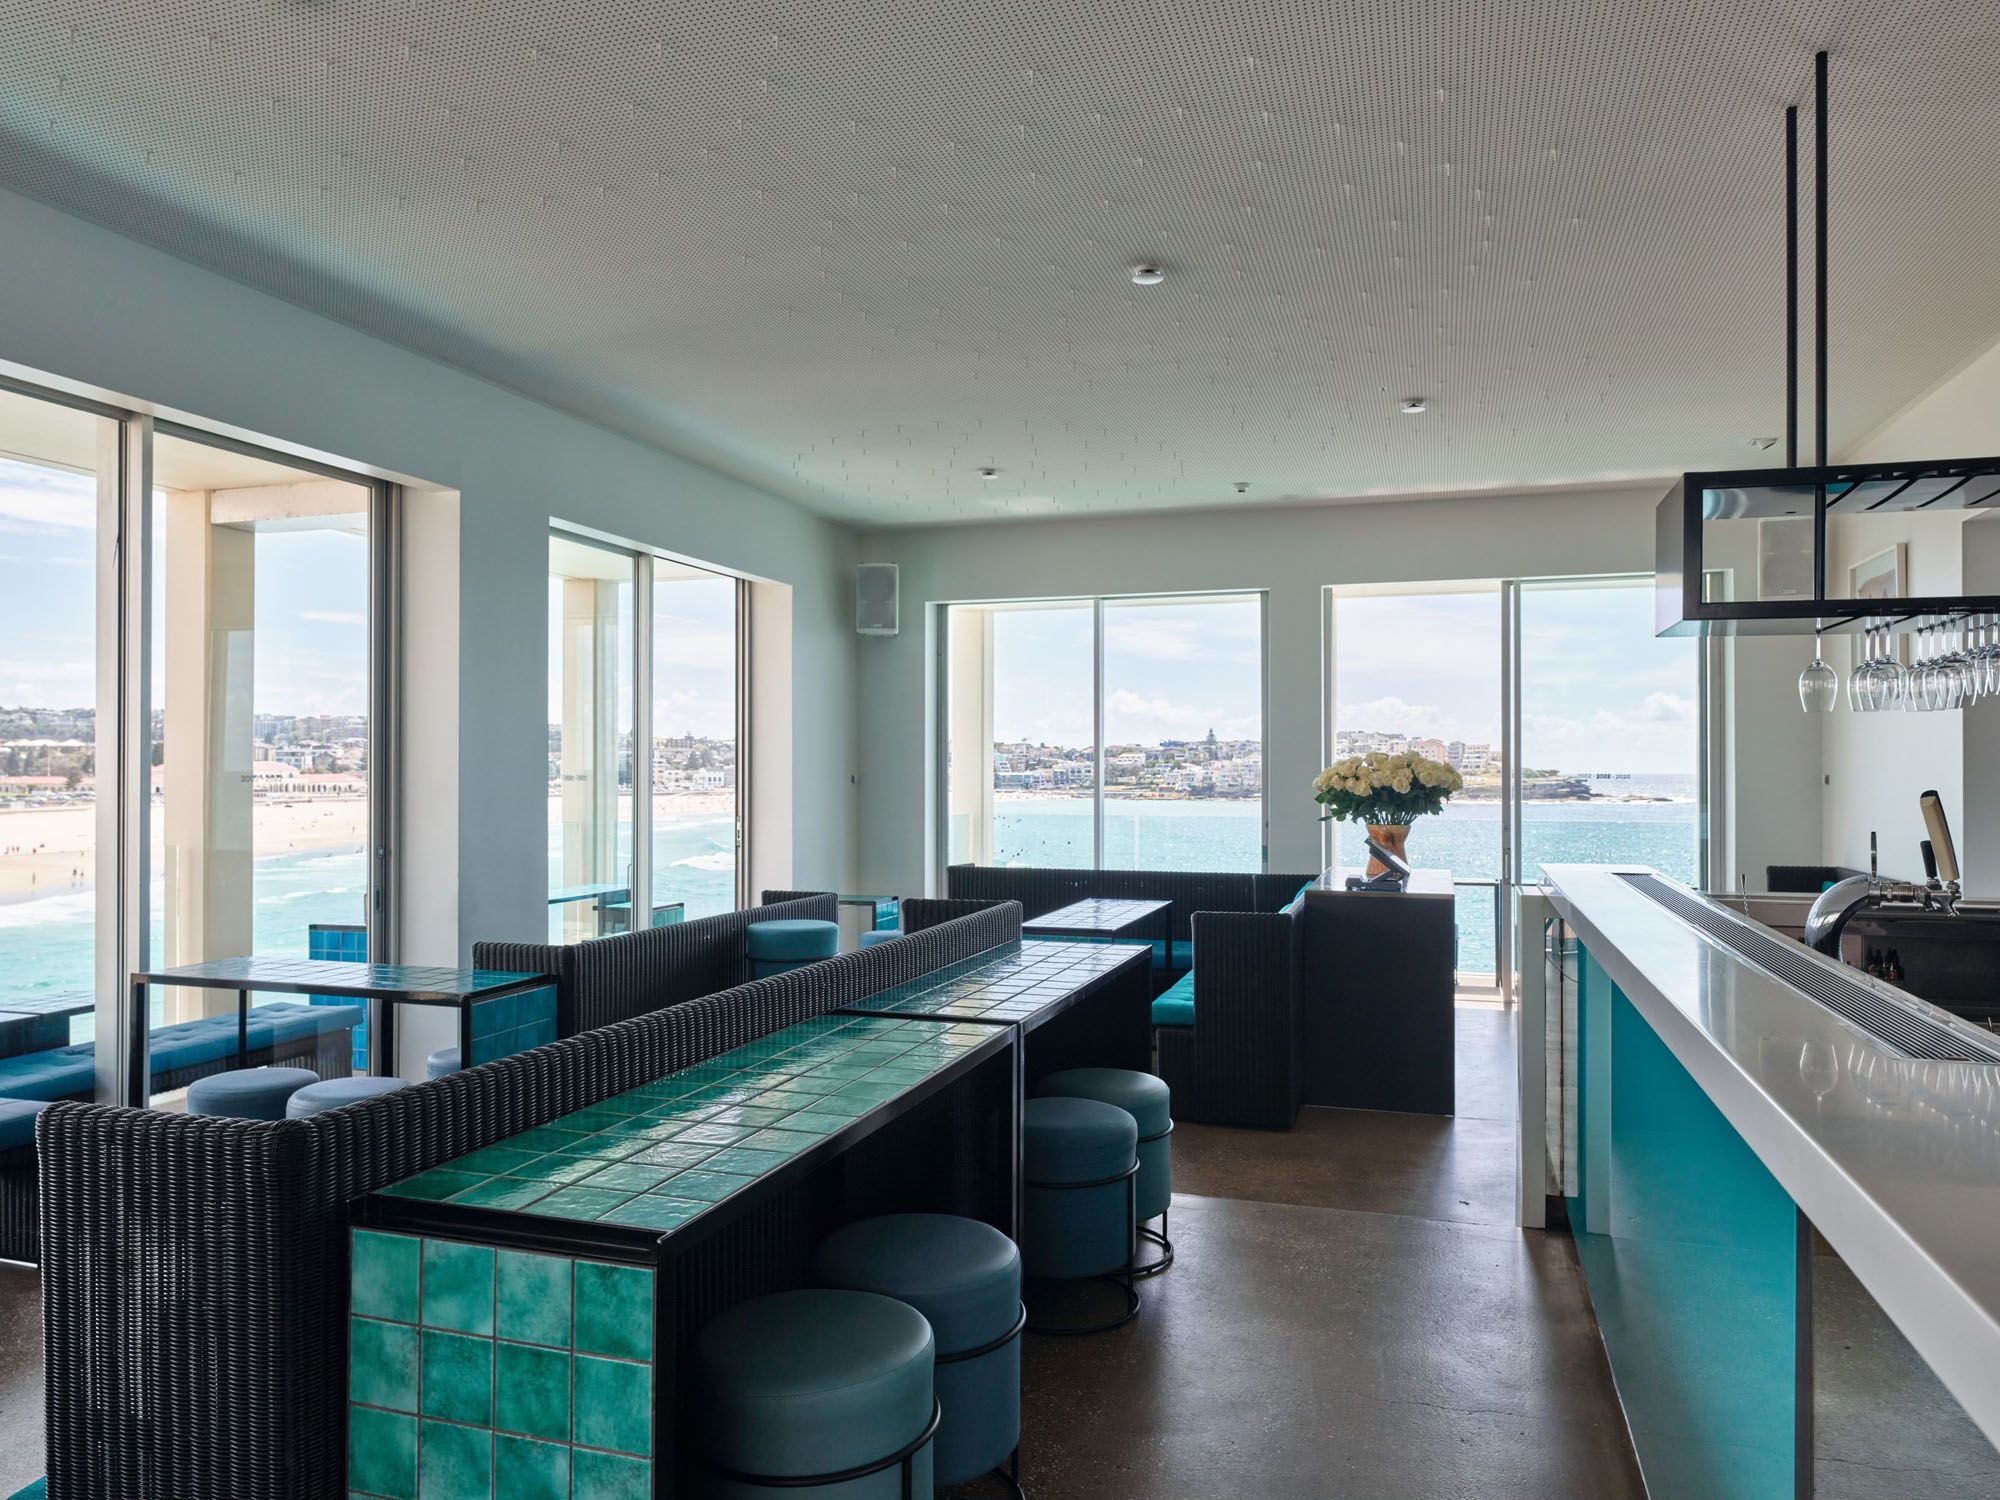 Icebergs Dining Room and Bar. Photo: Supplied